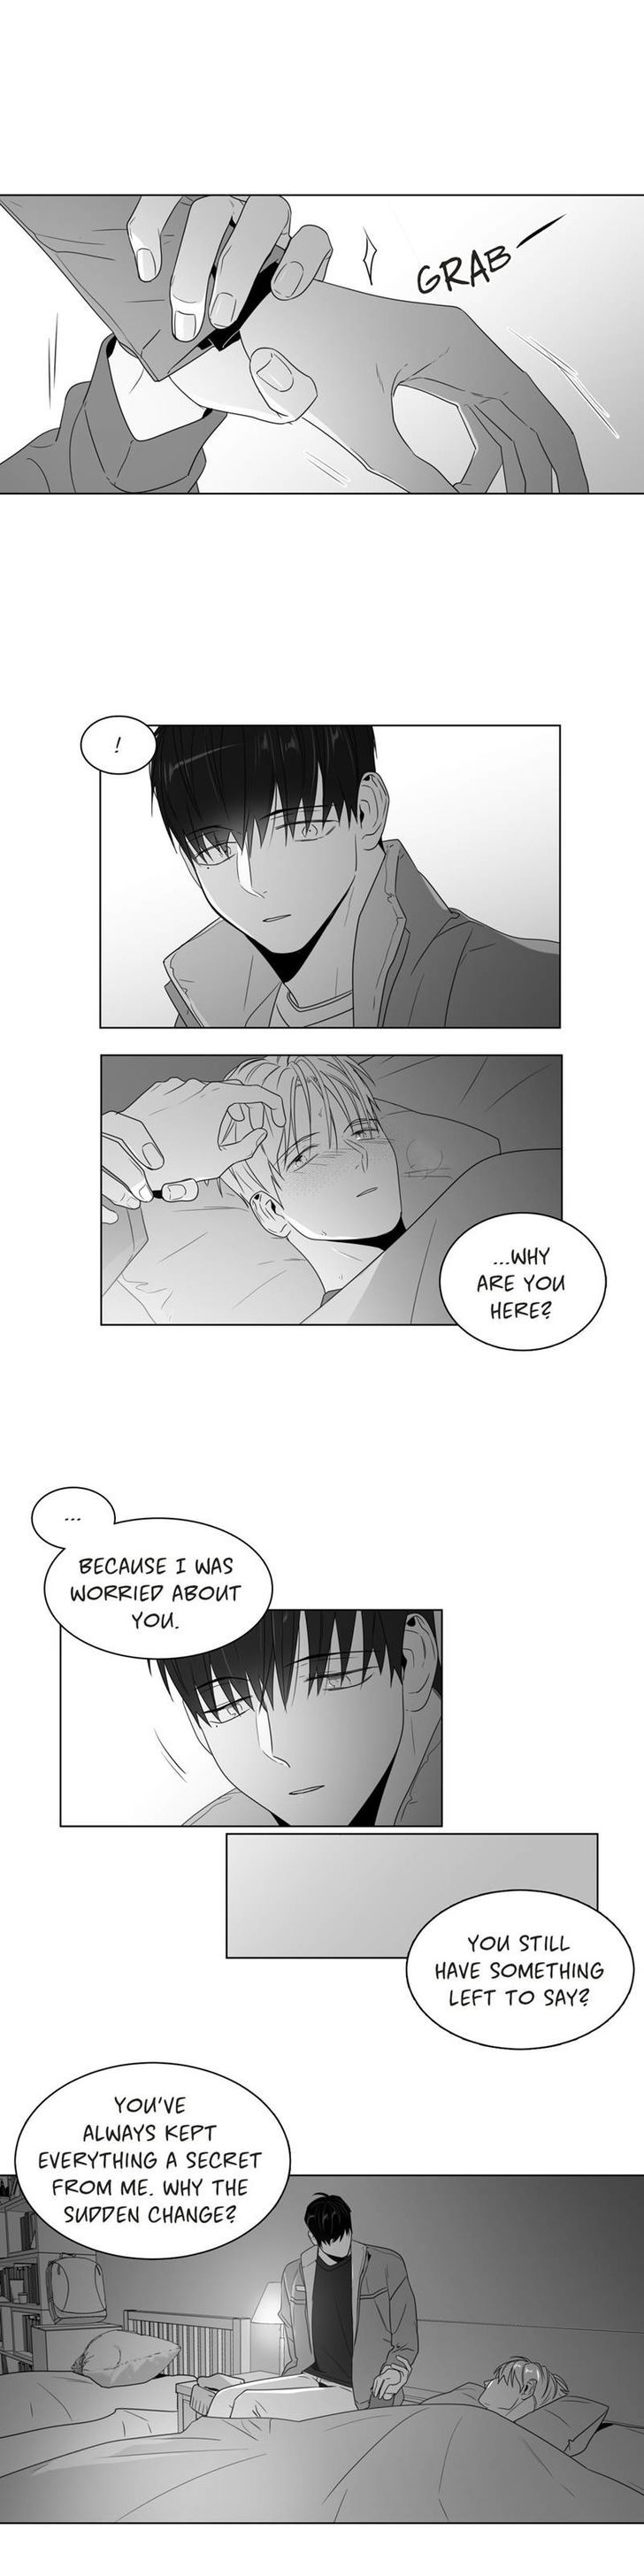 Lover Boy (Lezhin) Chapter 066 page 6